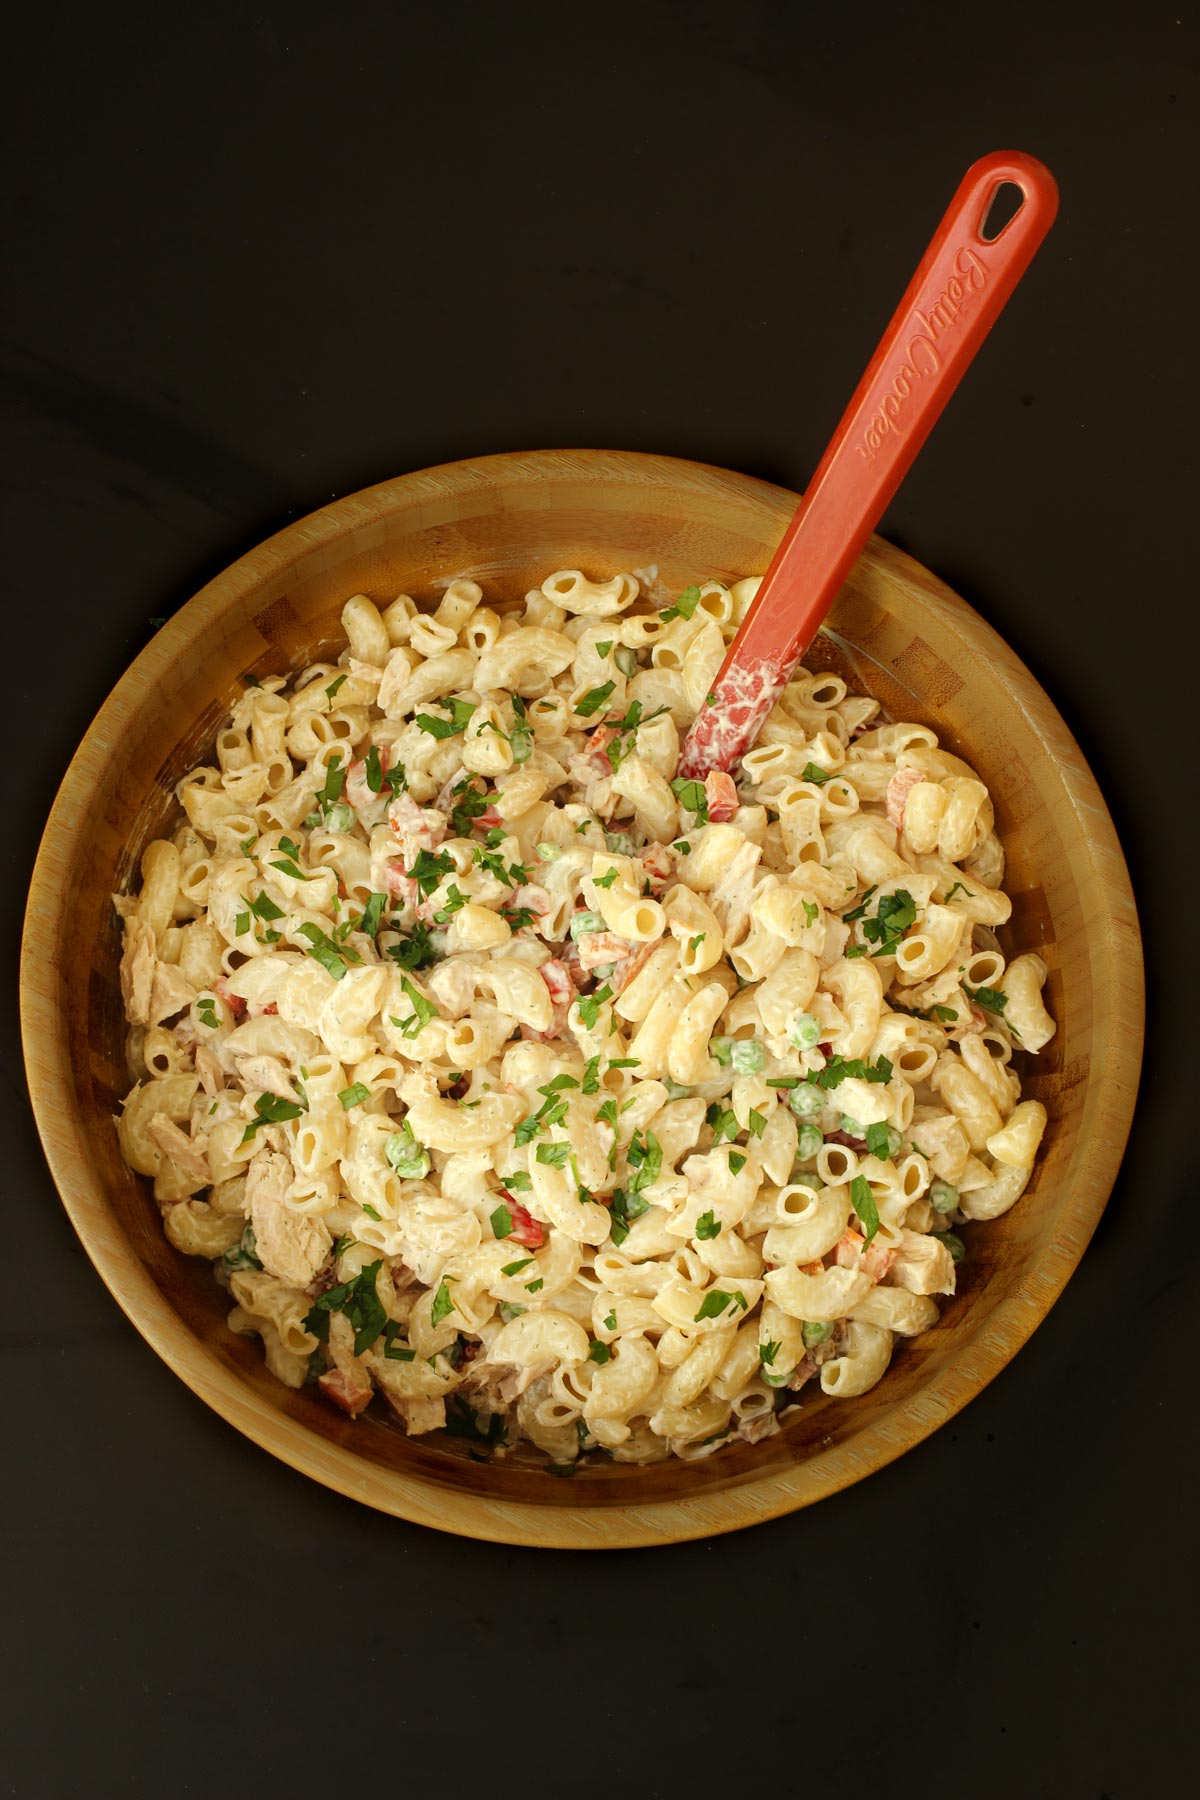 the tuna mac salad completely assembled in the wooden bowl with a red spoon